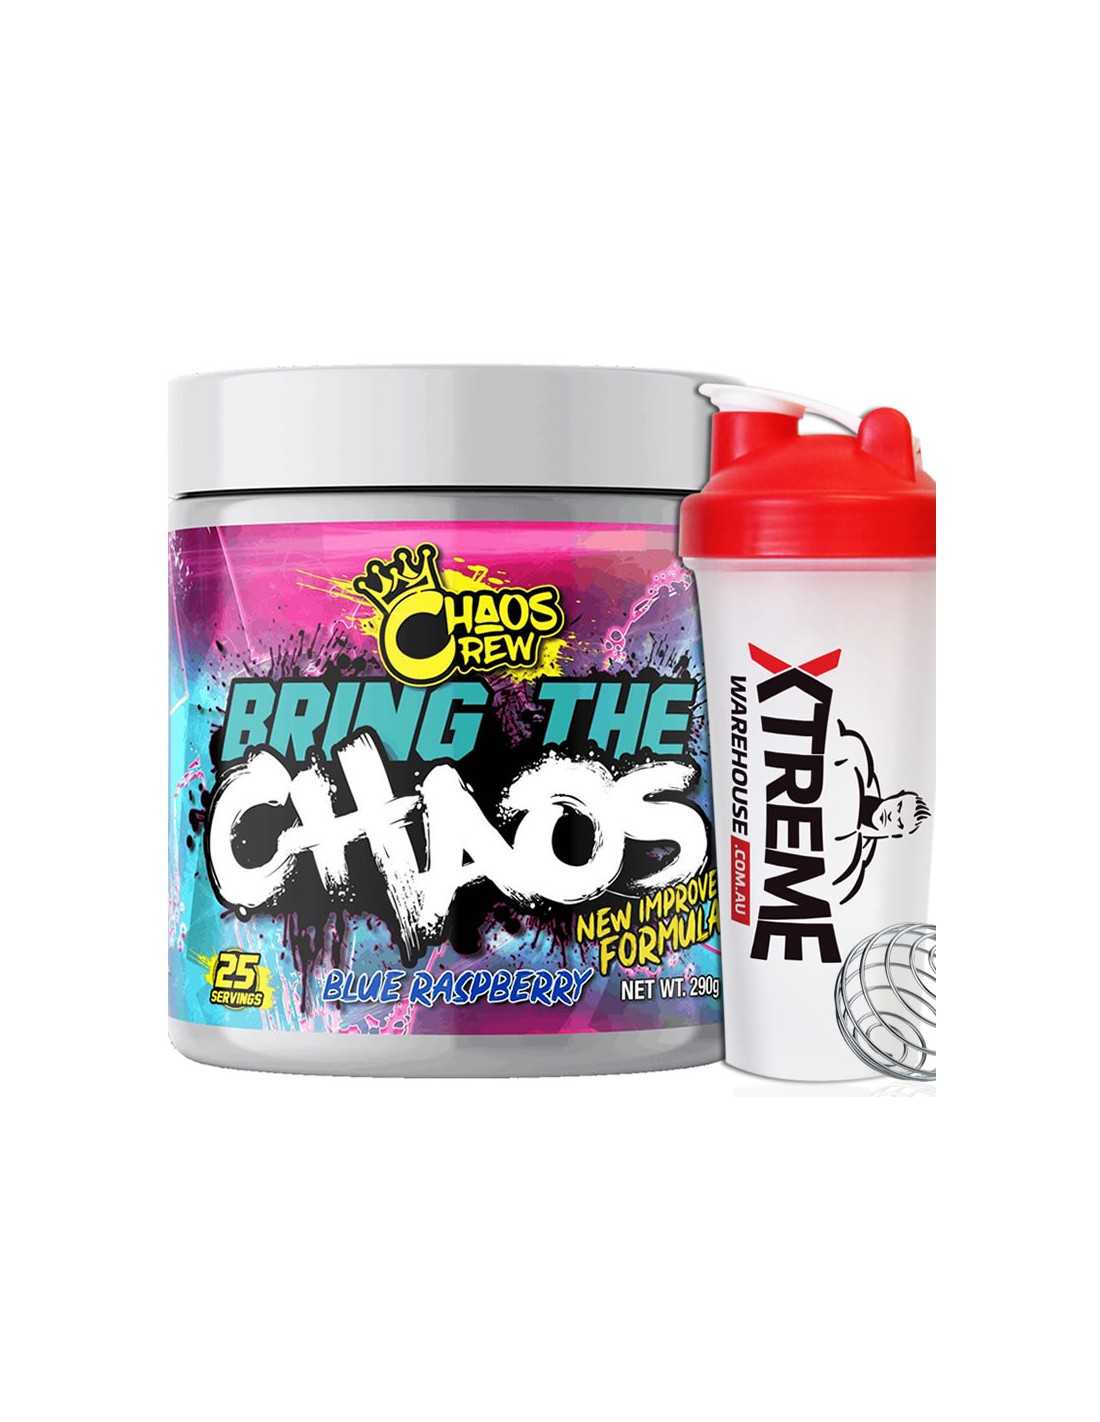 Bring The Chaos Pre-Workout By Chaos Crew Australia